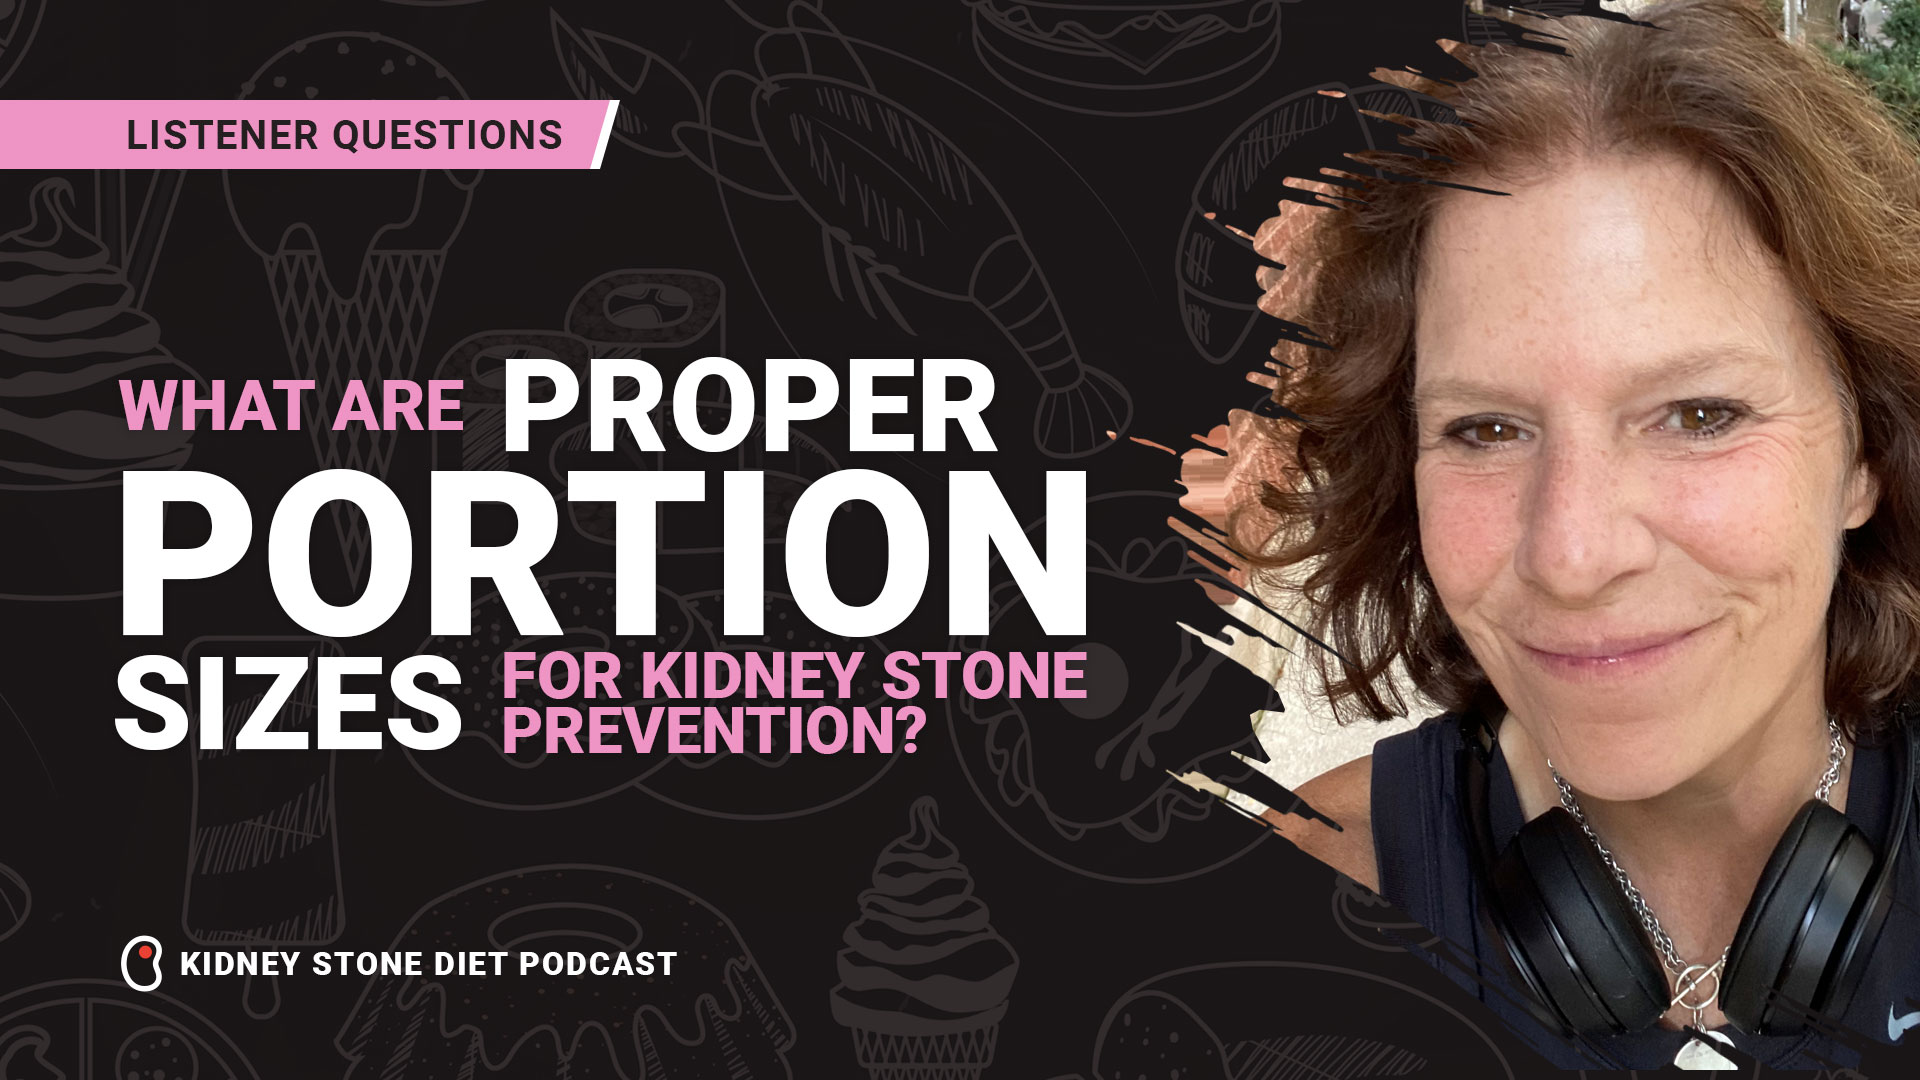 What are proper portion sizes for kidney stone prevention?